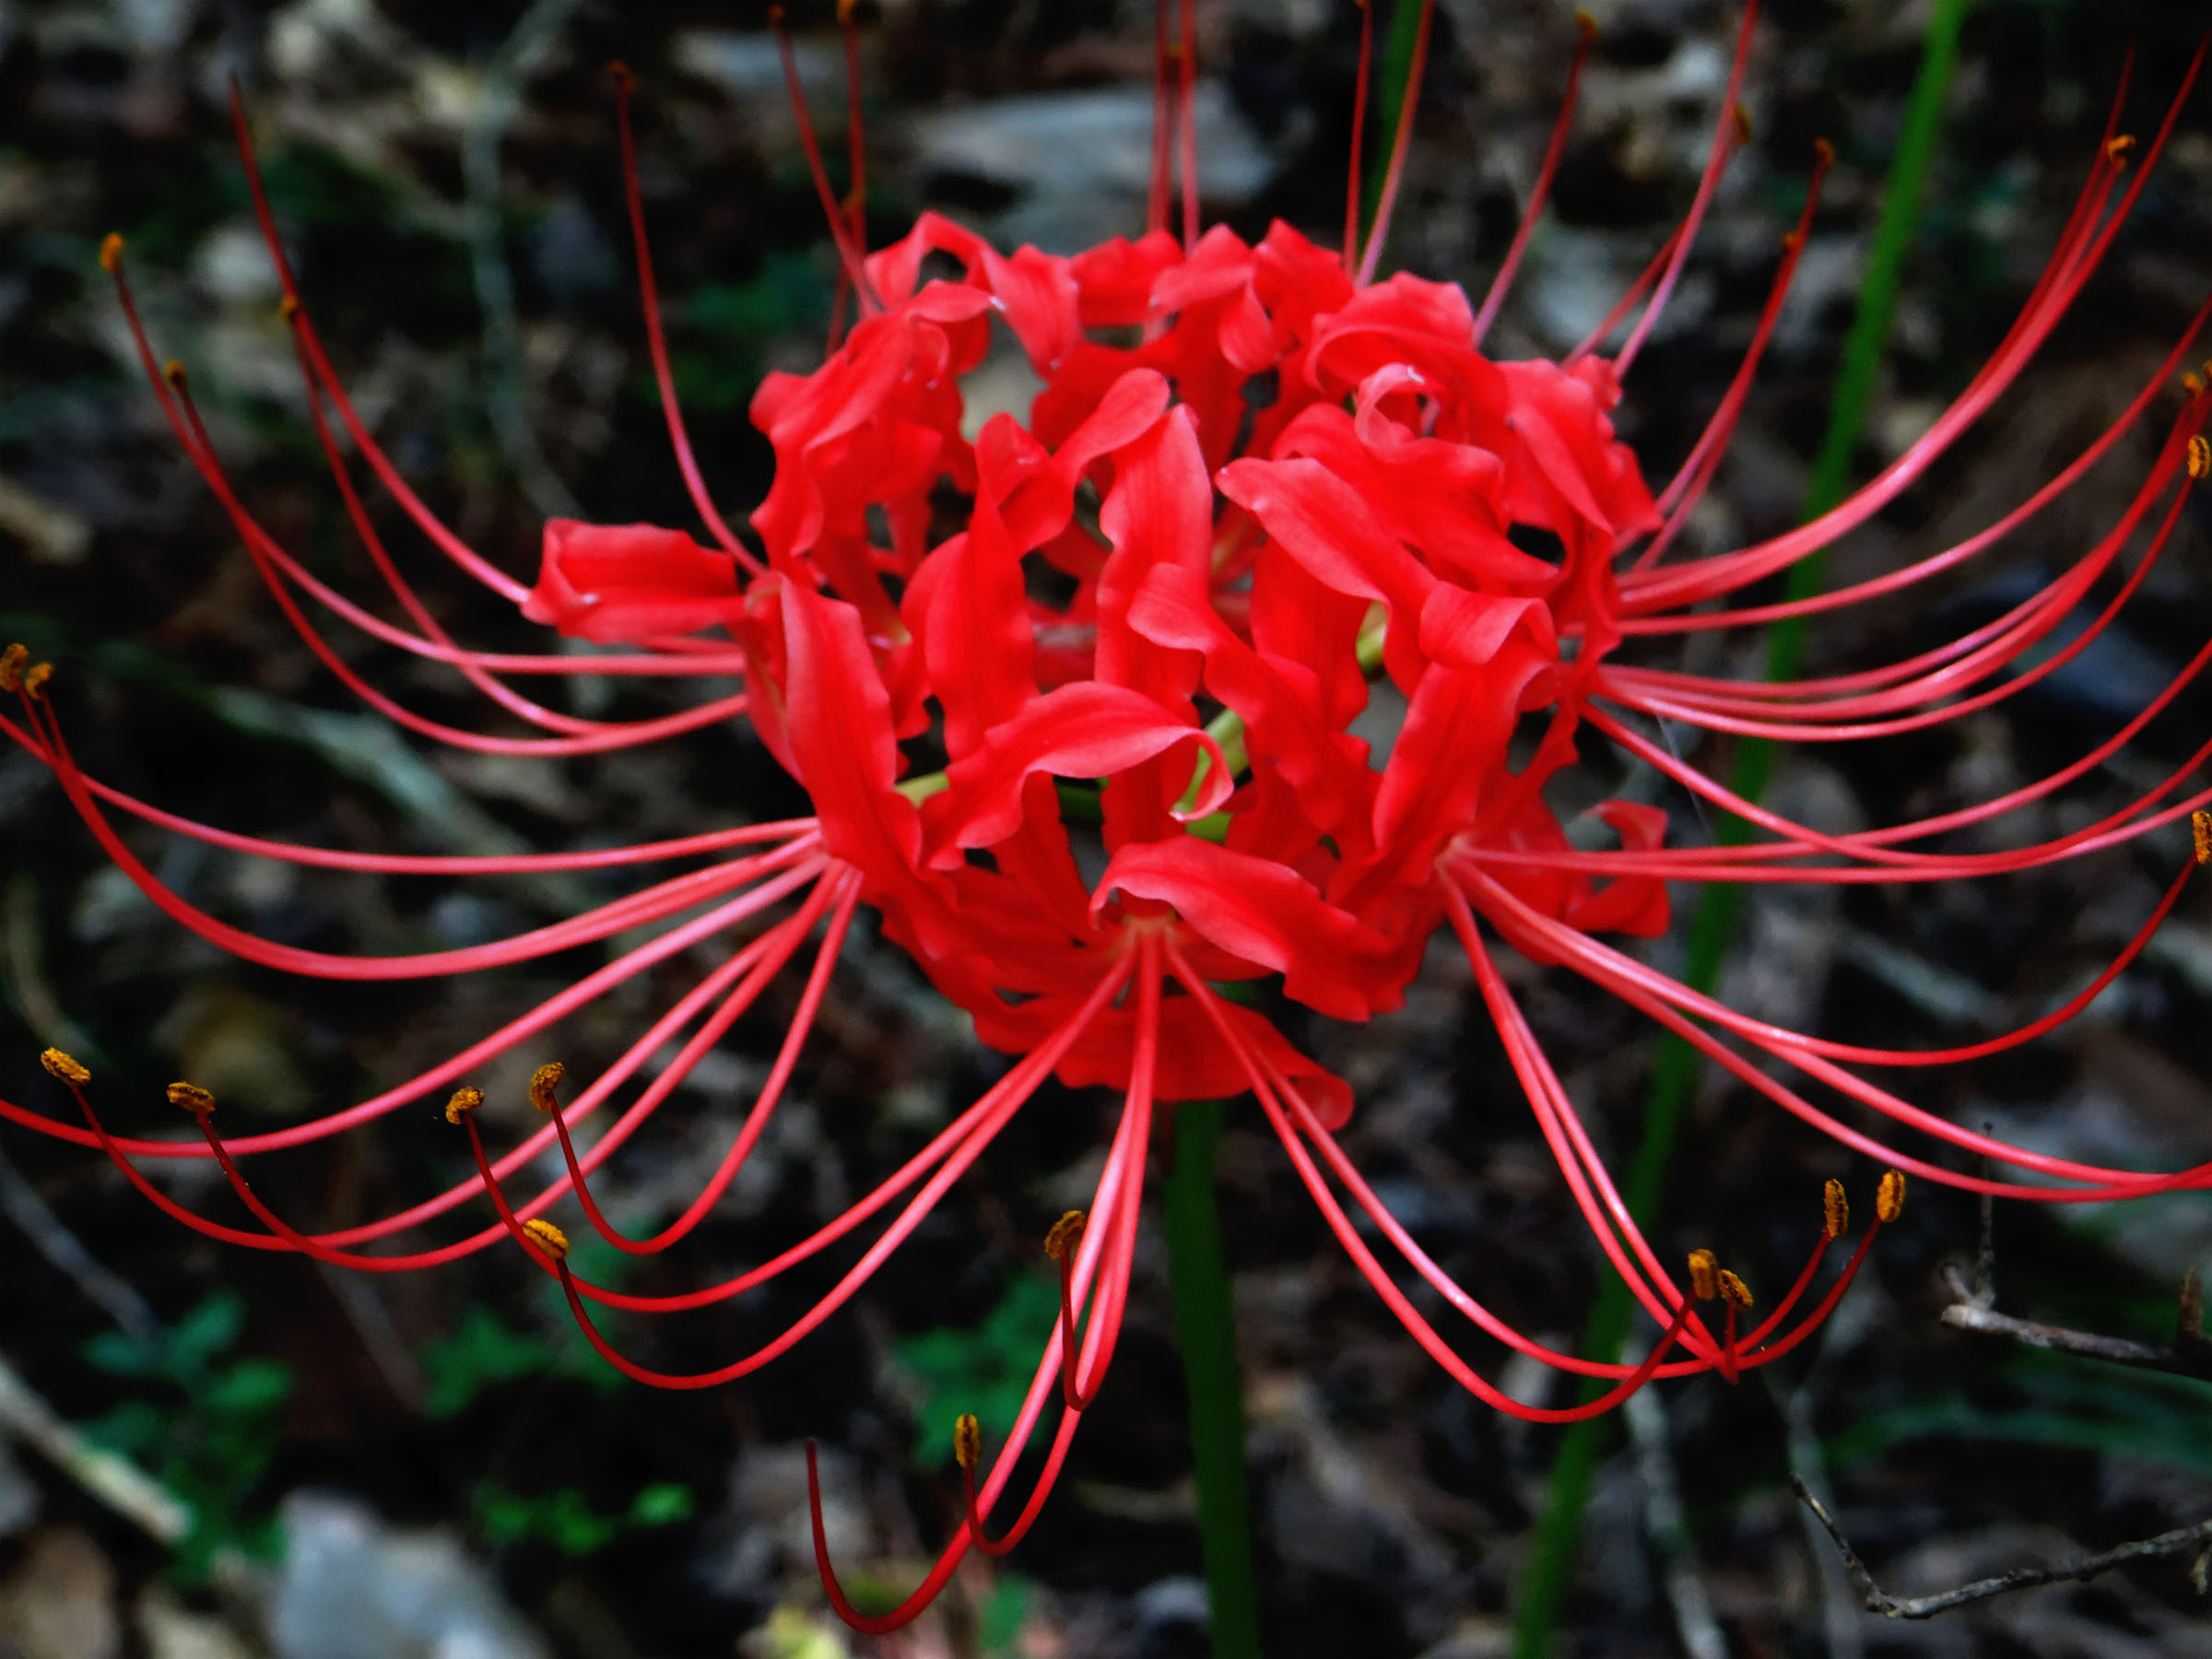 A flowering lycoris, one of the many plant species found in Big Woods Nature Trail. Photo by Kathy Kinsel. 